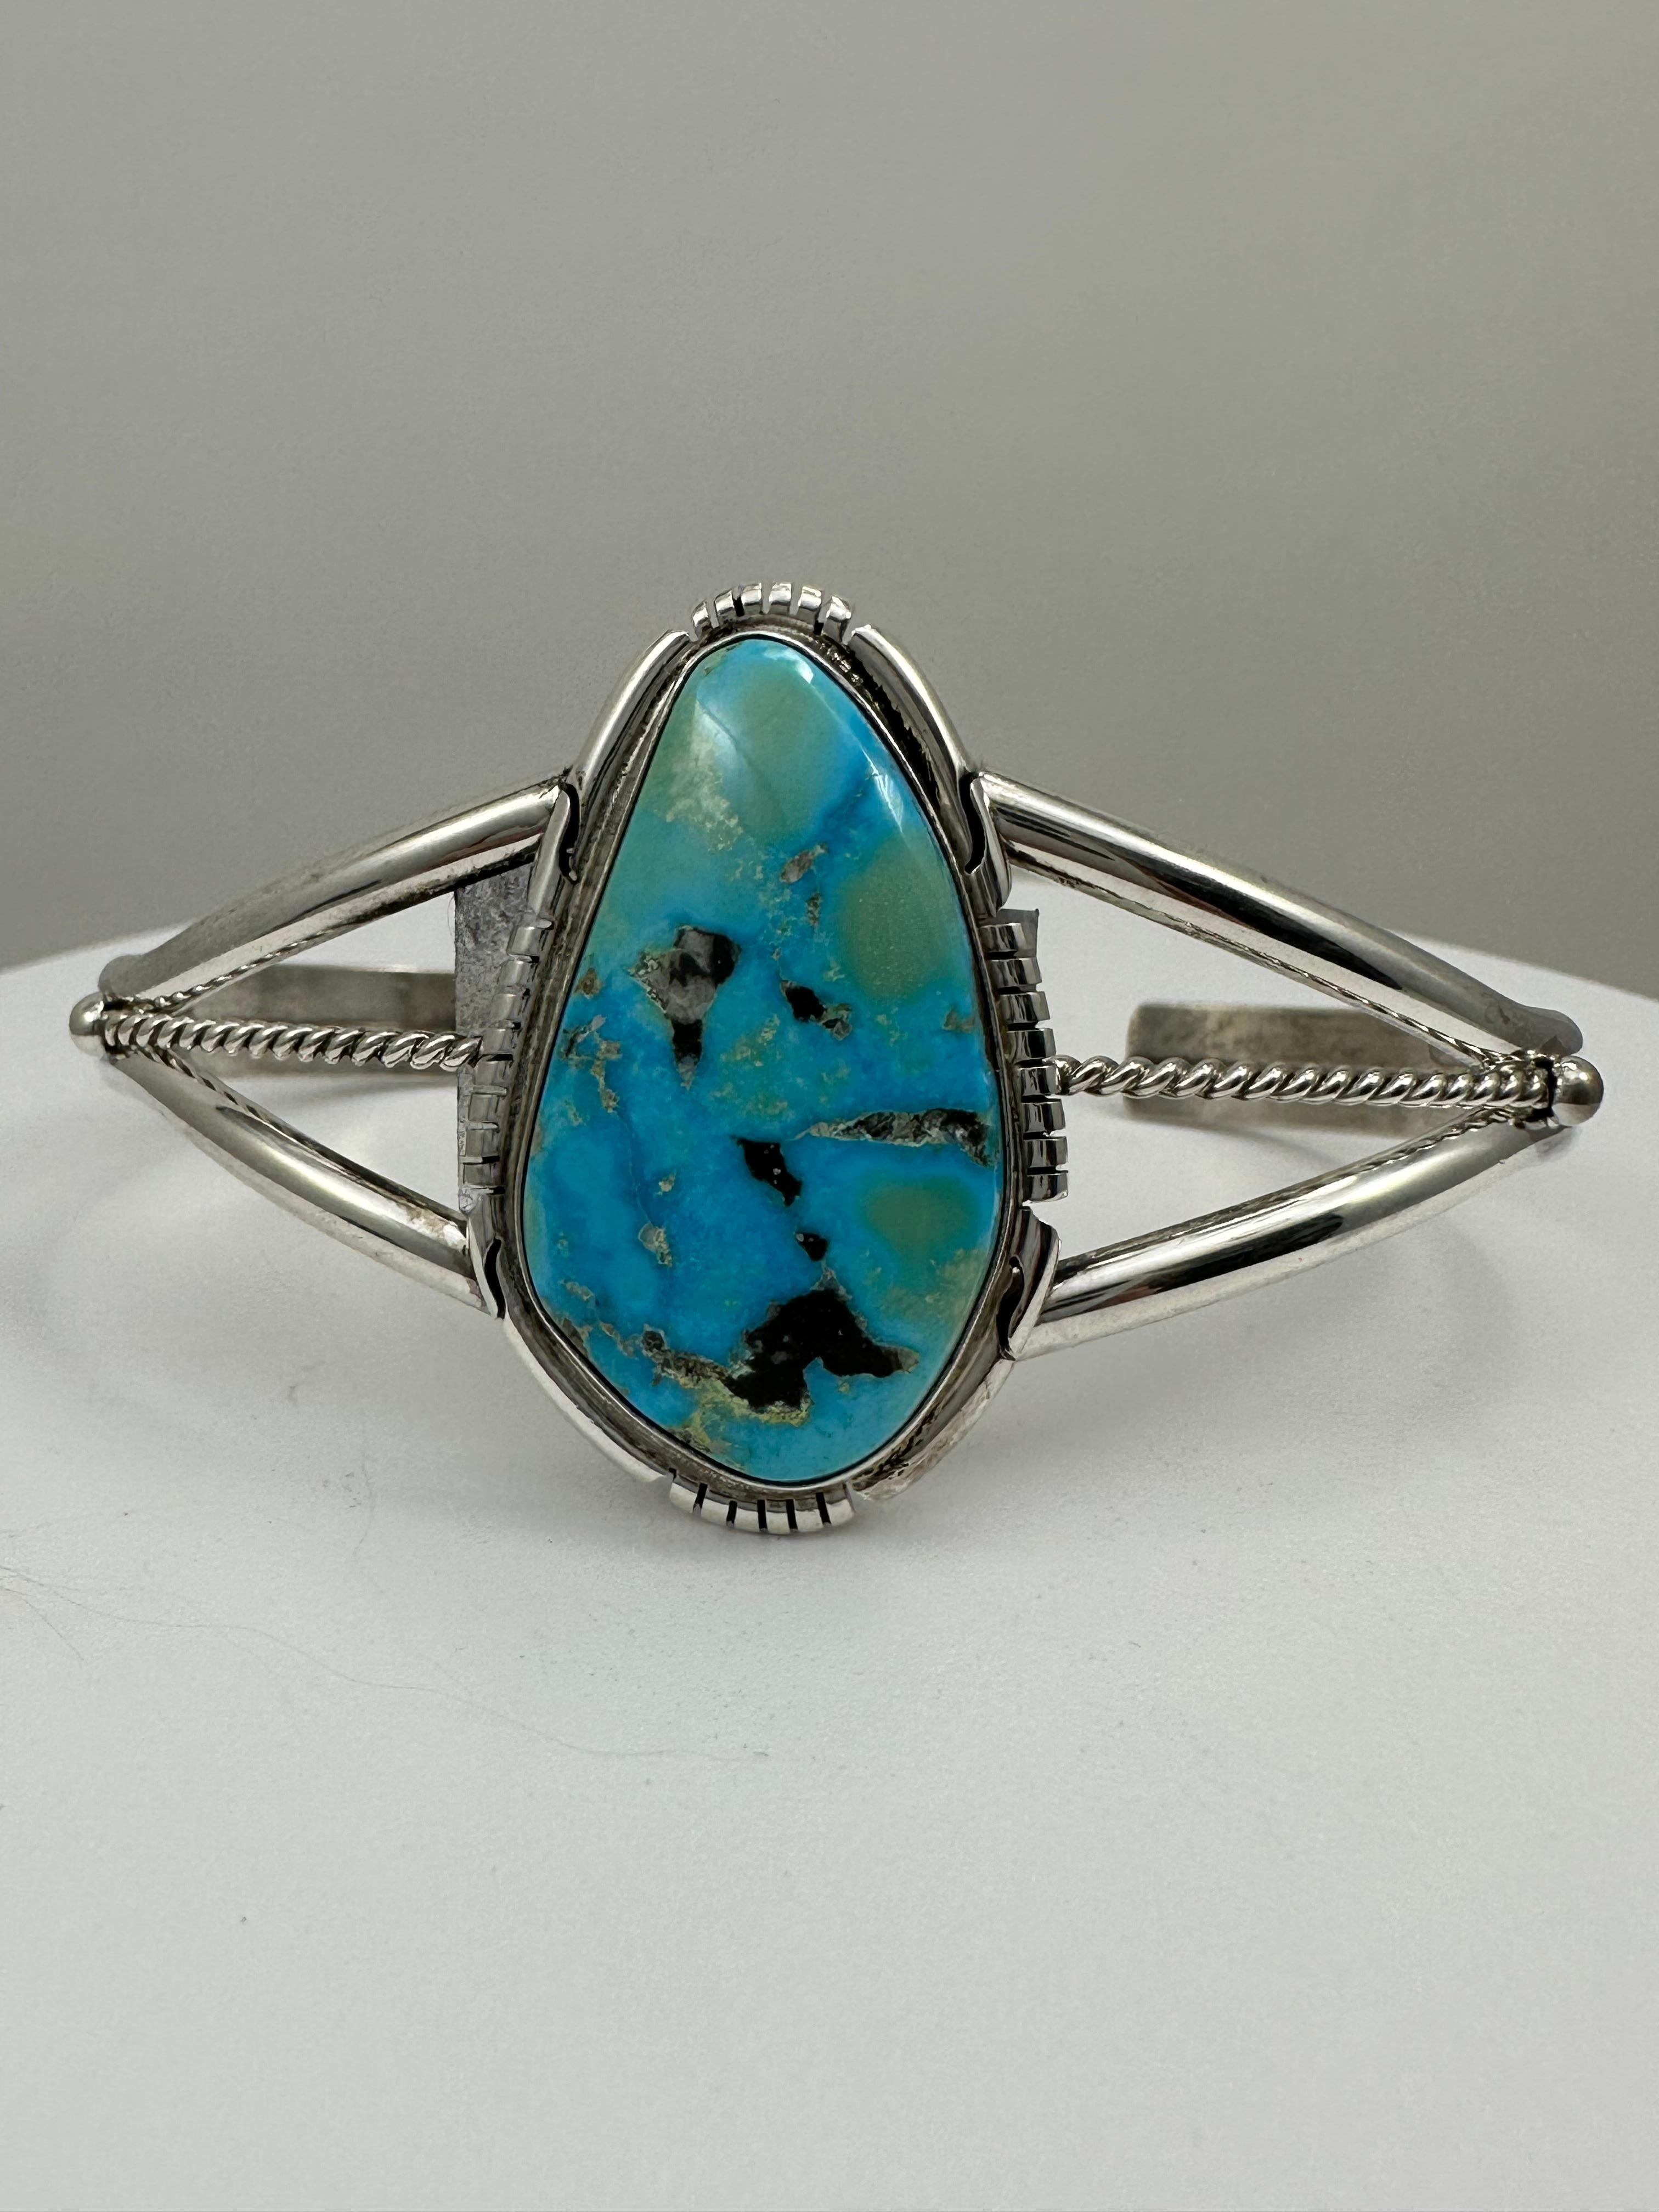 Artisan Sterling Silver Kingman Turquoise Navajo Handmade Cuff Bracelet by Dave Skeets For Sale